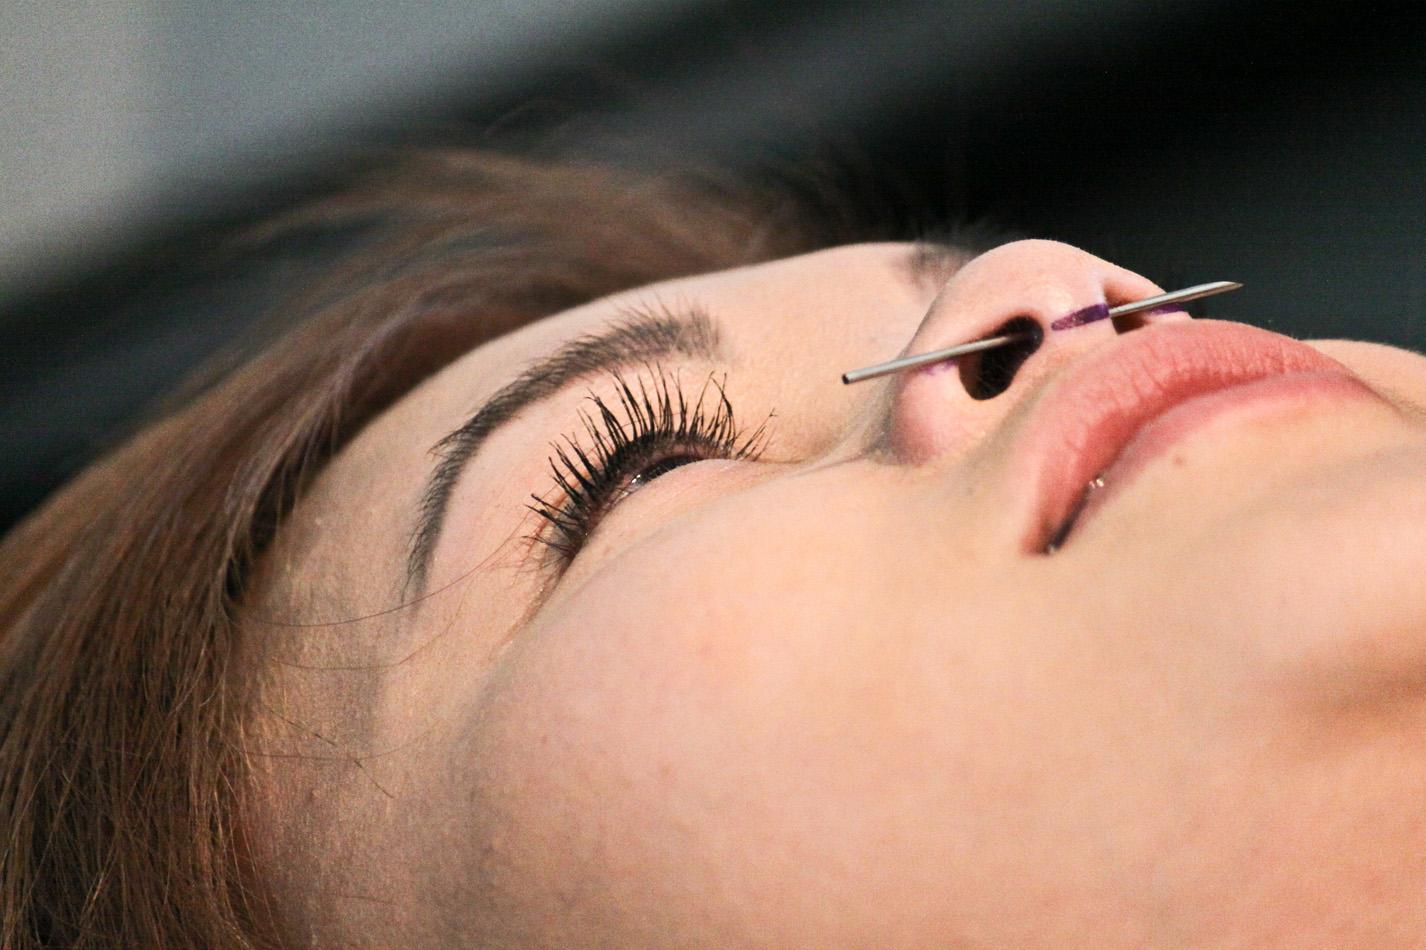 SF States Nursing major, Ly Do, gets a nose pierceing at Moms Body Shop on Haight street in San Francisco, April 21, 2012.